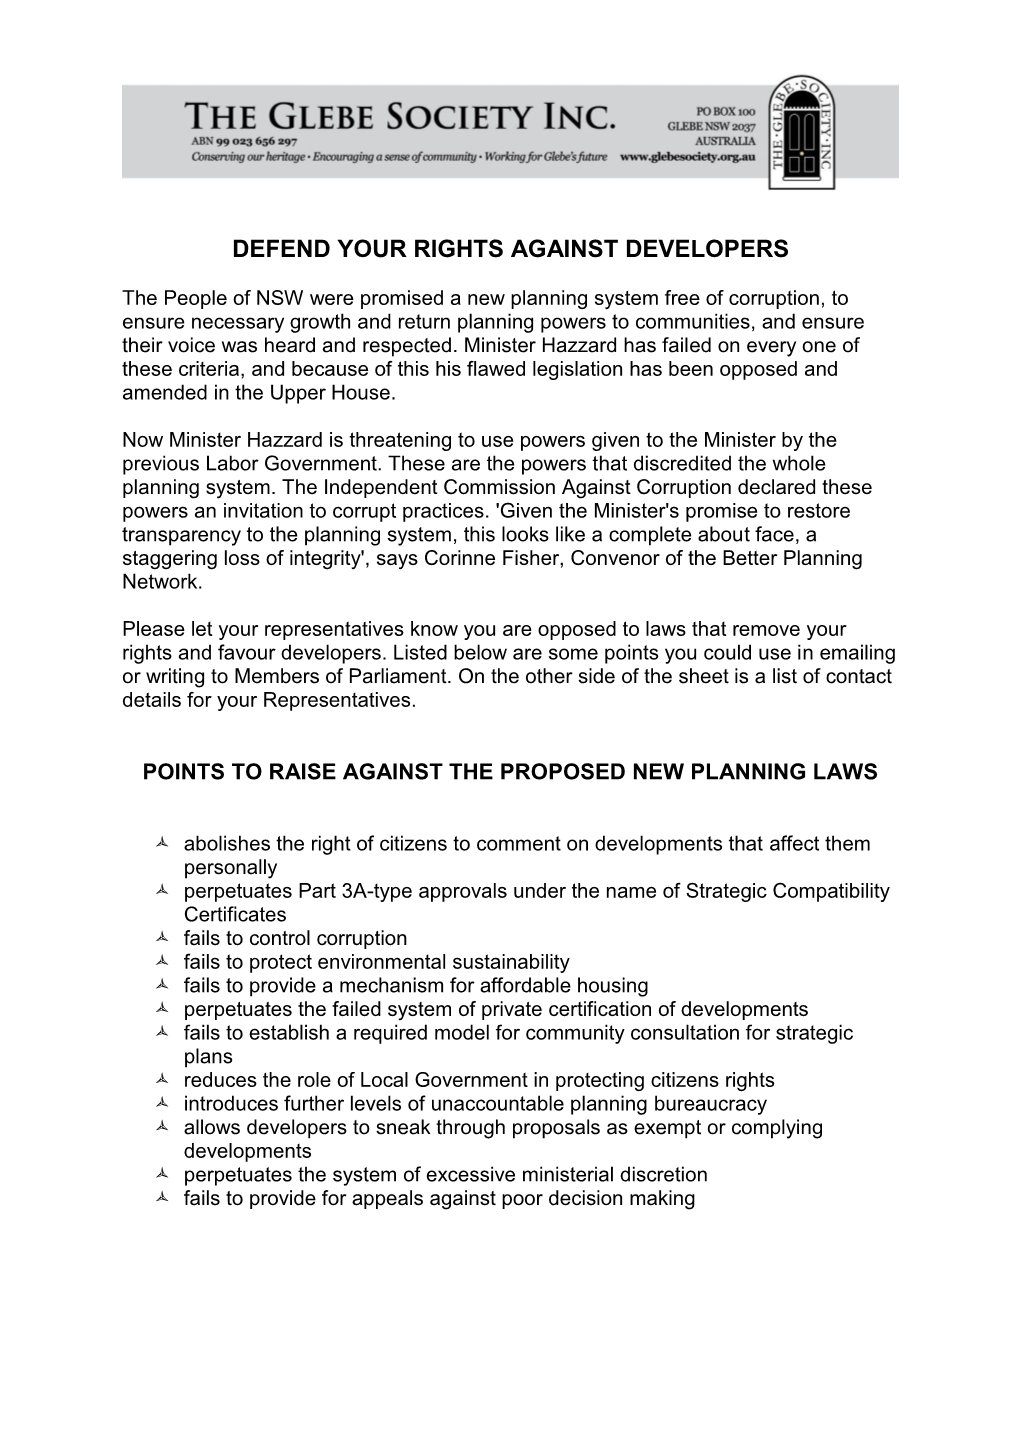 Defend Your Rights Against Developers